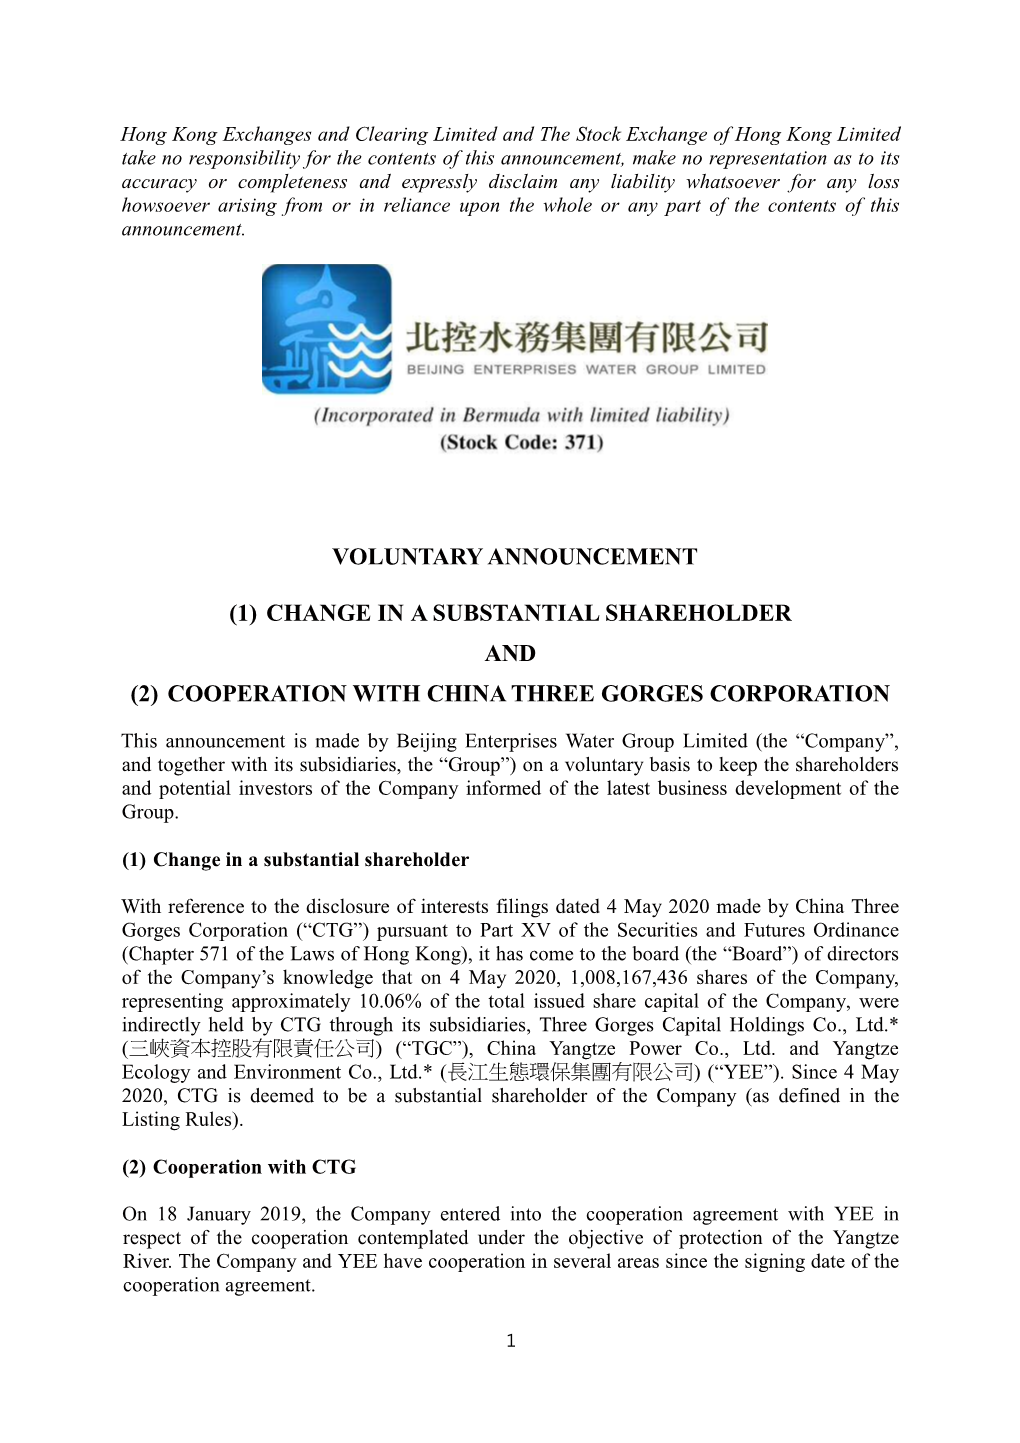 Cooperation with China Three Gorges Corporation